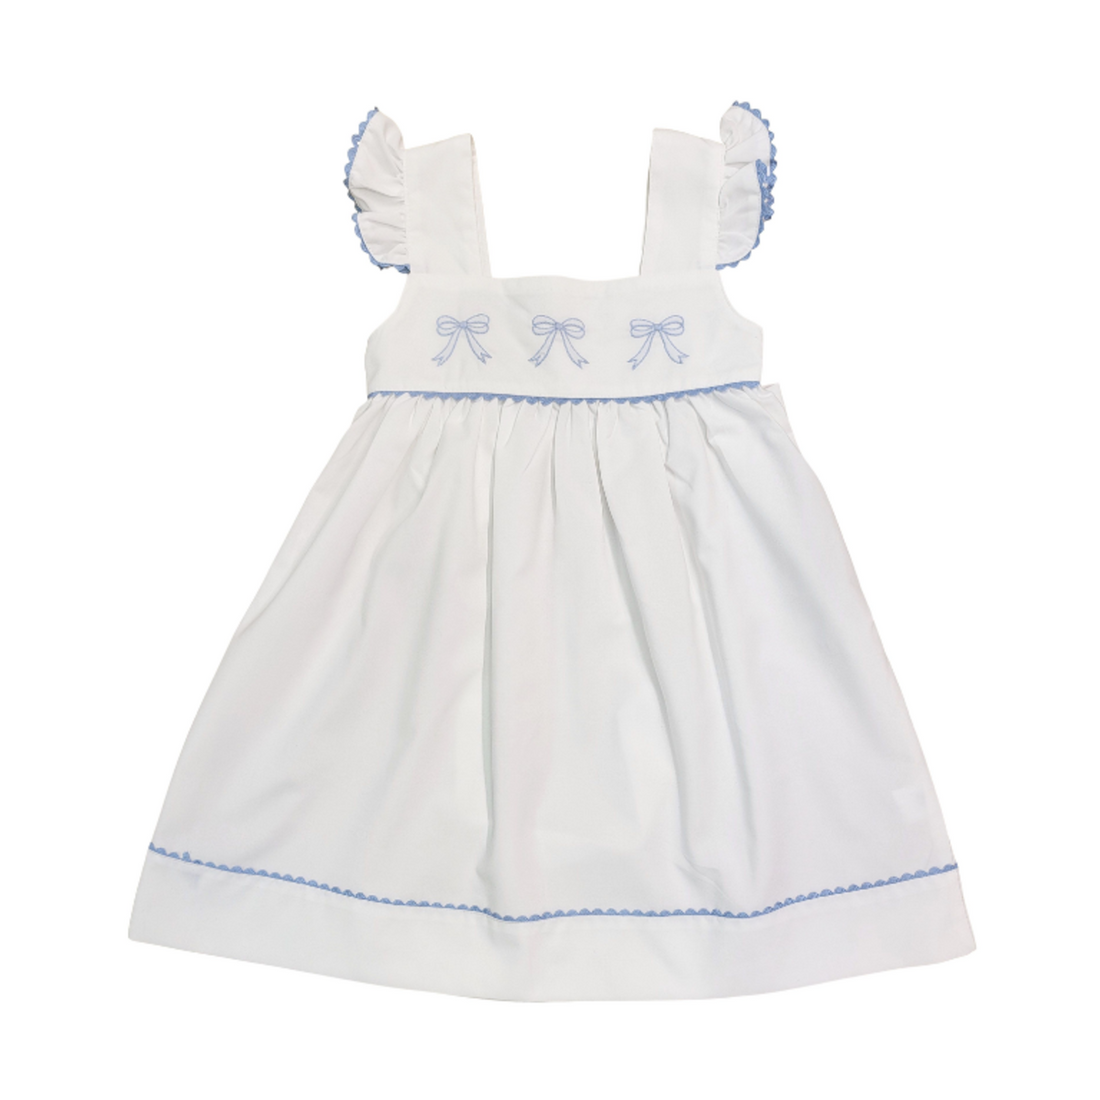 Sweeet Dreams Embroidery Blue Bows Dress